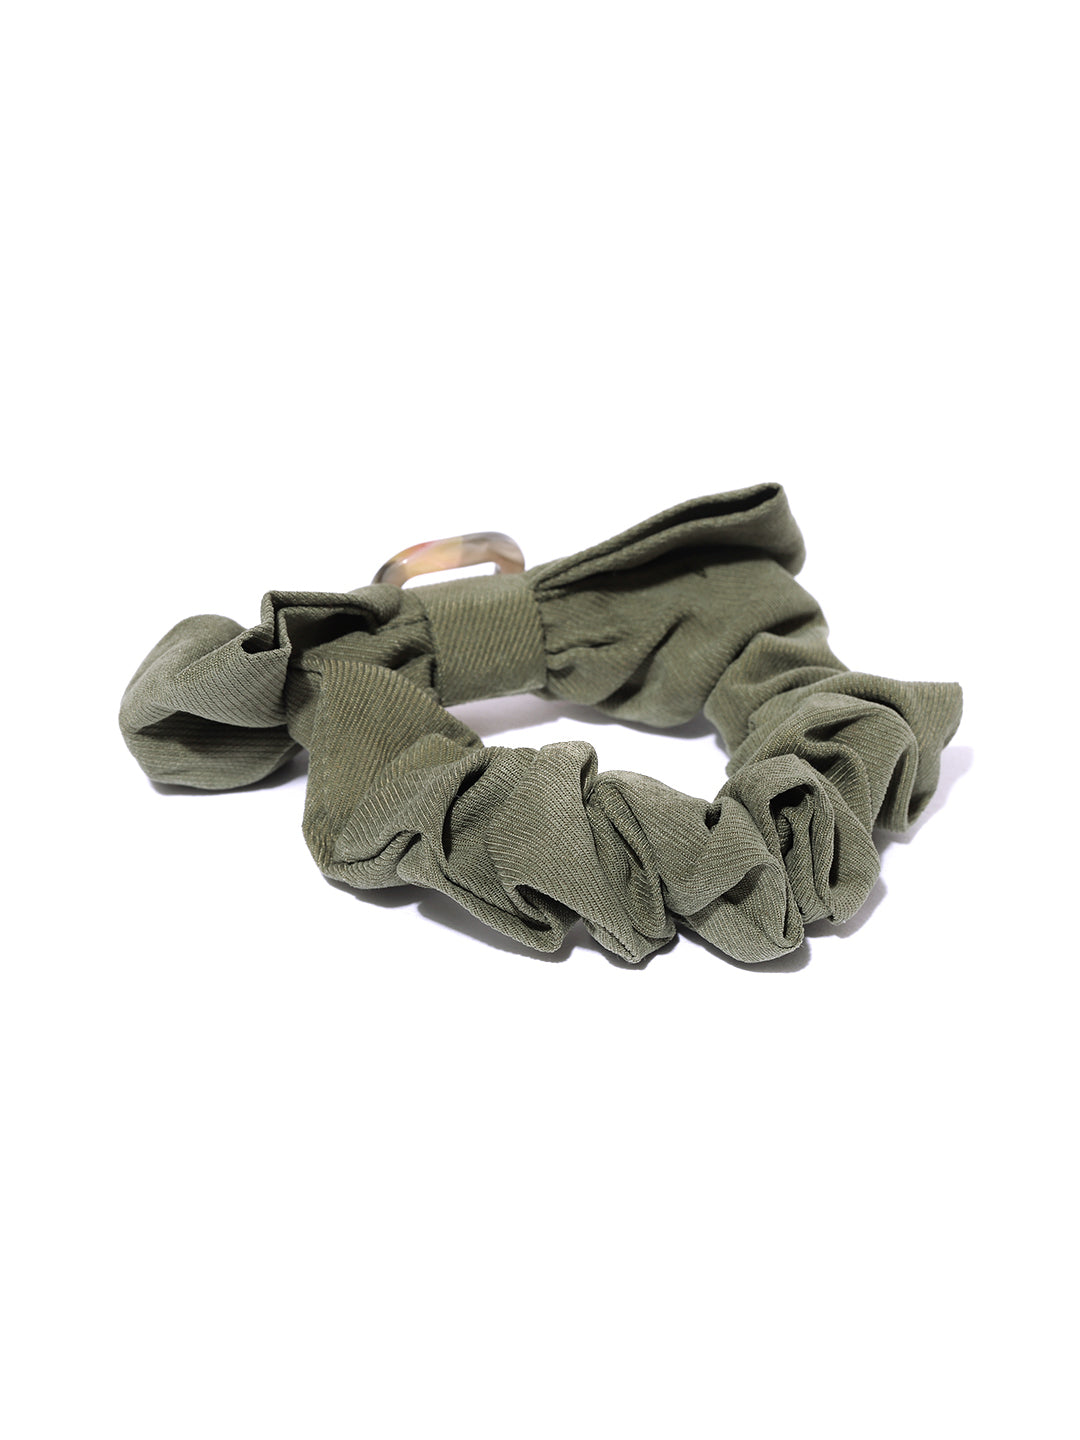 Blueberry olive green bow scrunchies